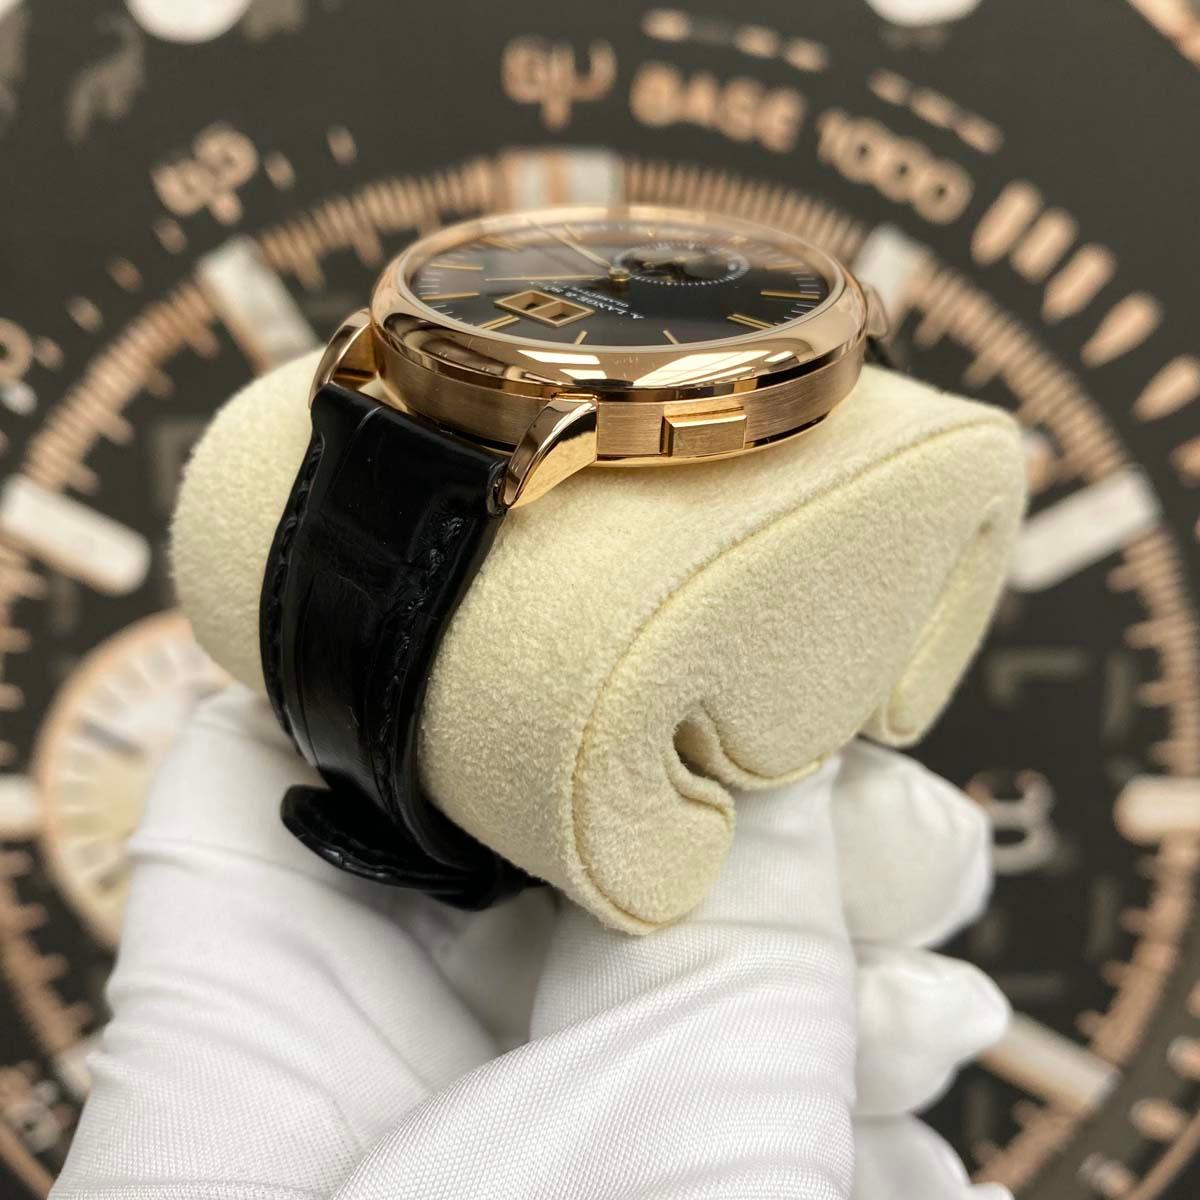 A. Lange & Sohne Saxonia Boutique Exclusive 18kt Rose Gold Moon Phase Automatic 384.031 Black Dial Pre-Owned - Gotham Trading 